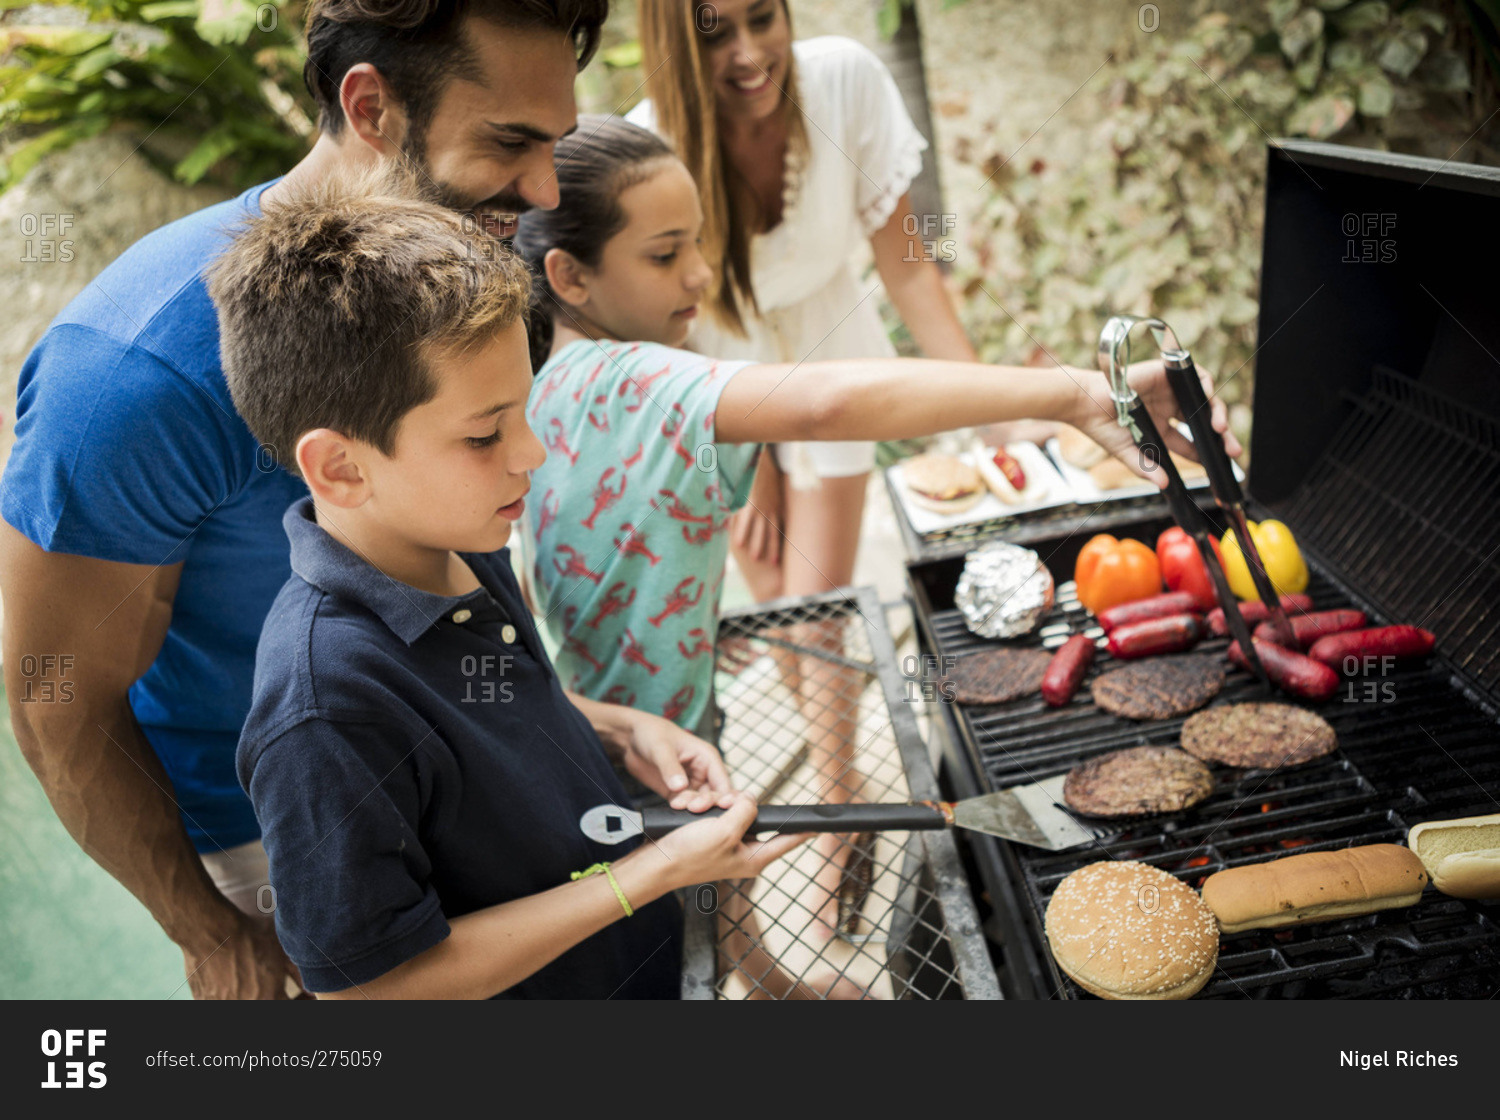 Family grilling burgers and hot dogs together